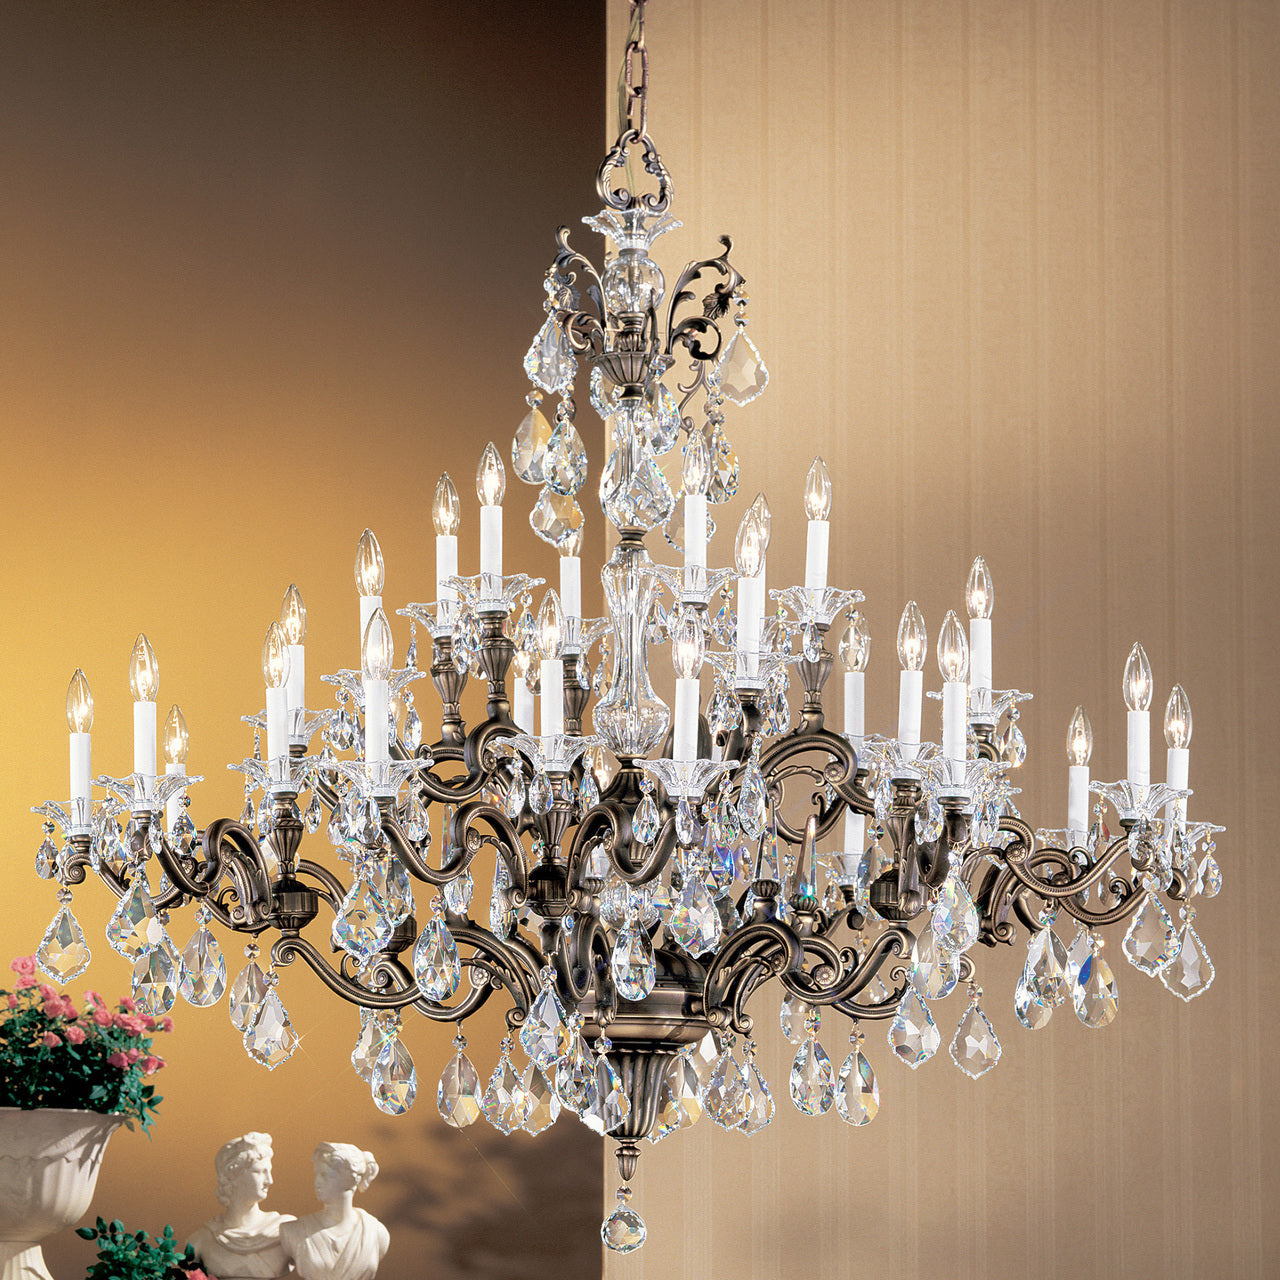 Classic Lighting 57130 RB CBK Via Firenze Crystal Chandelier in Roman Bronze (Imported from Spain)